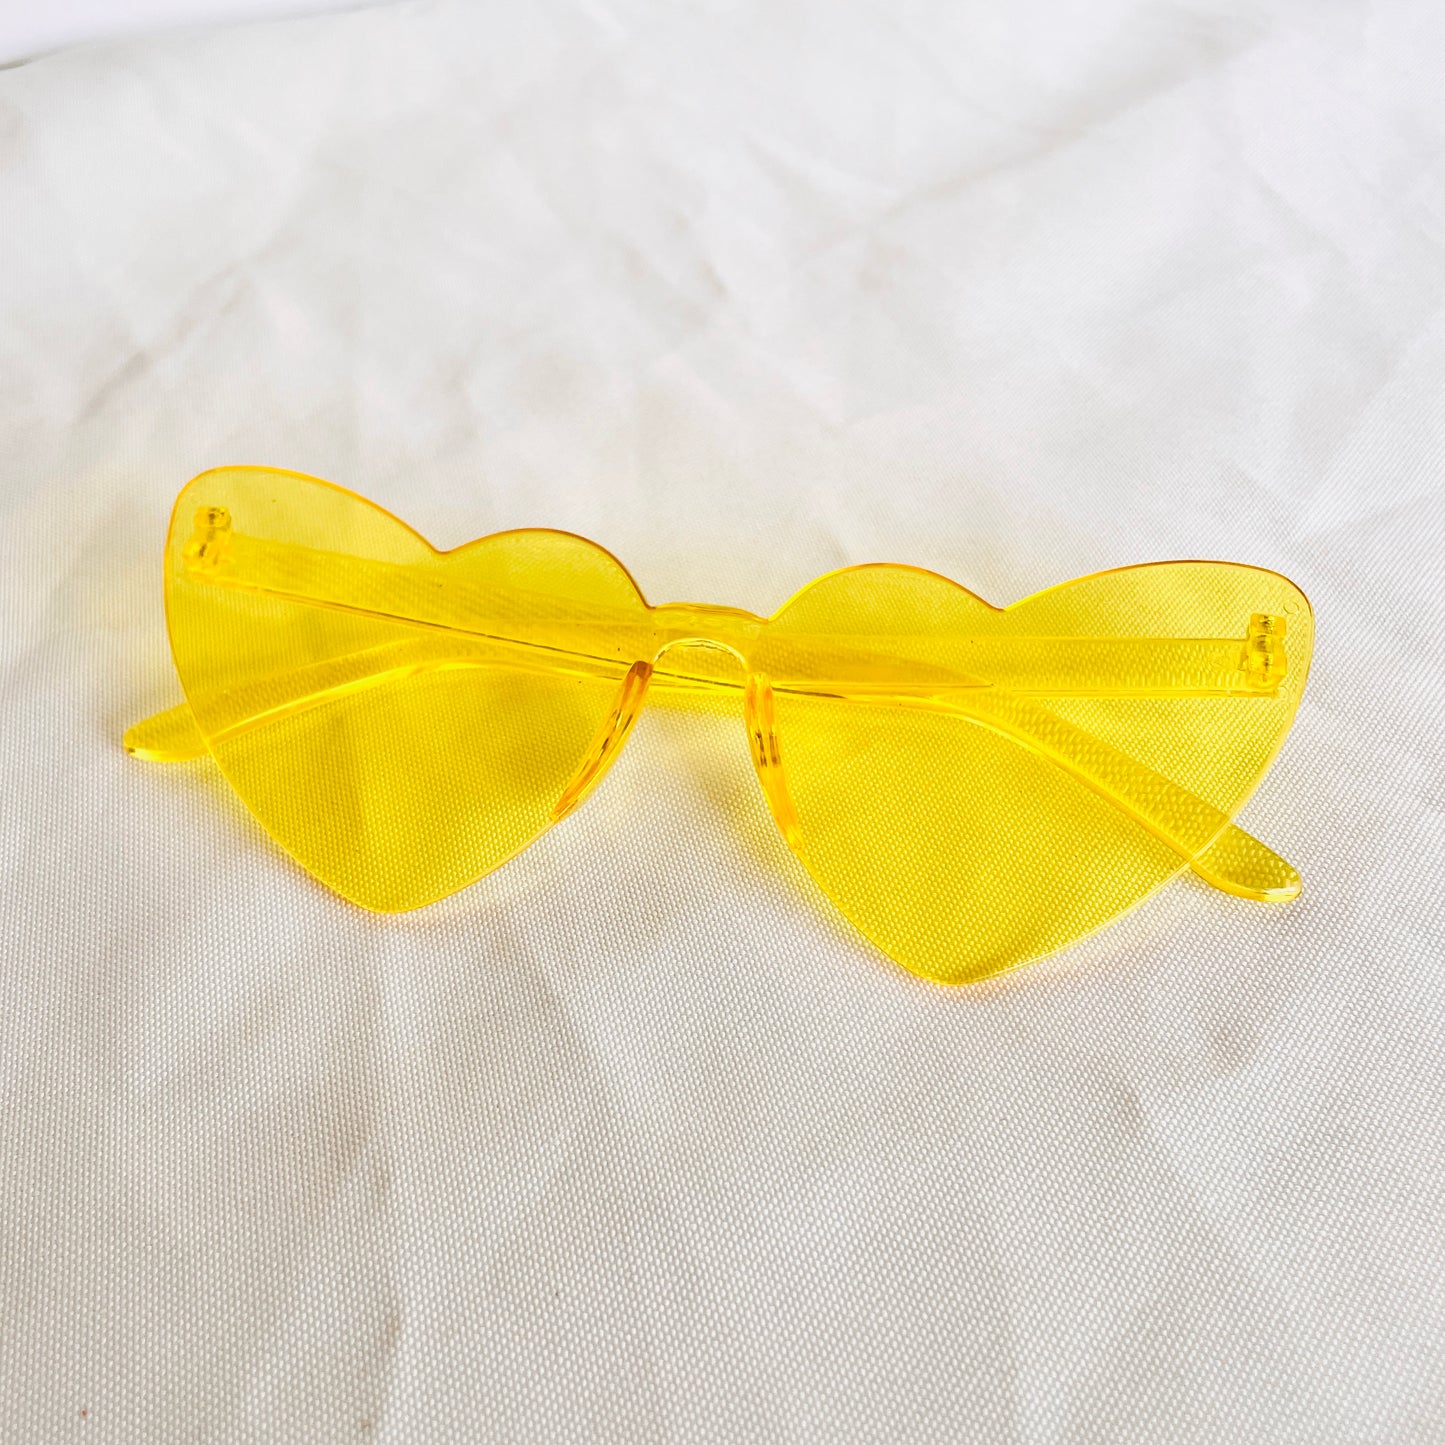 Yellow Clear Heart Adult Sunglasses